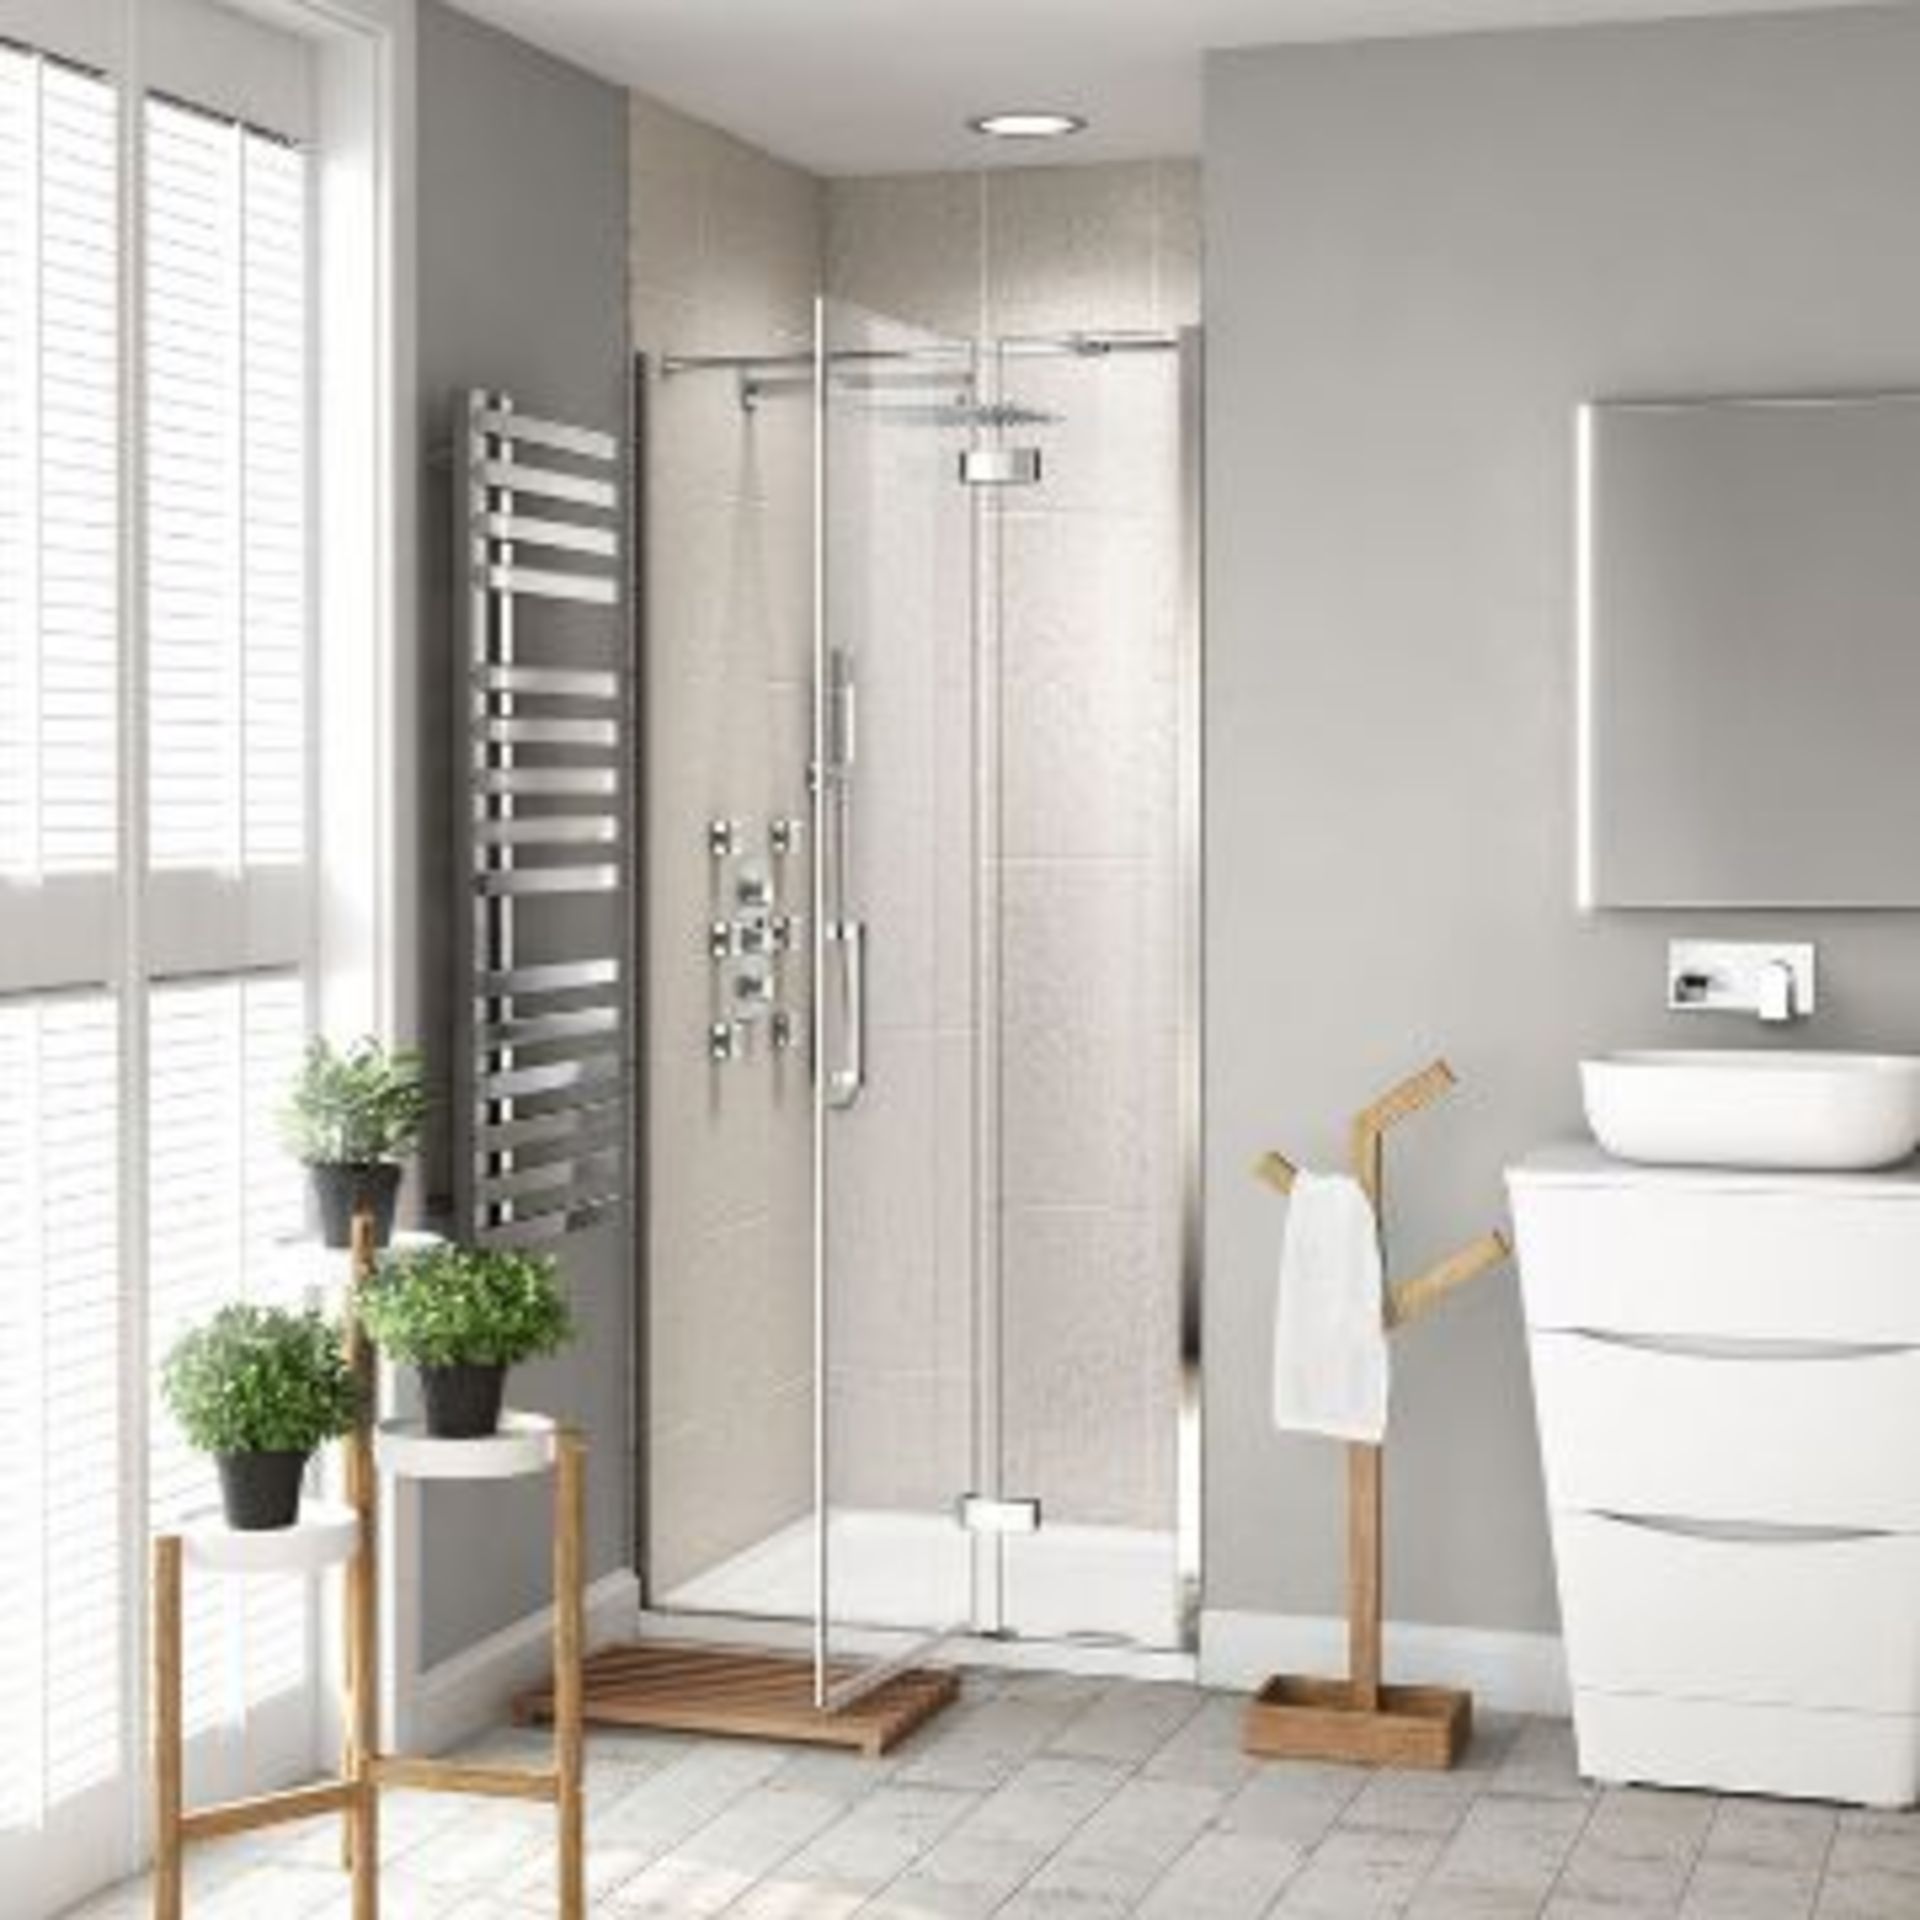 New & Boxed 700mm - 8mm - Premium Easy clean Hinged Shower Door. RRP £499.99.H82600Cp. 8mm Eas... - Image 2 of 2